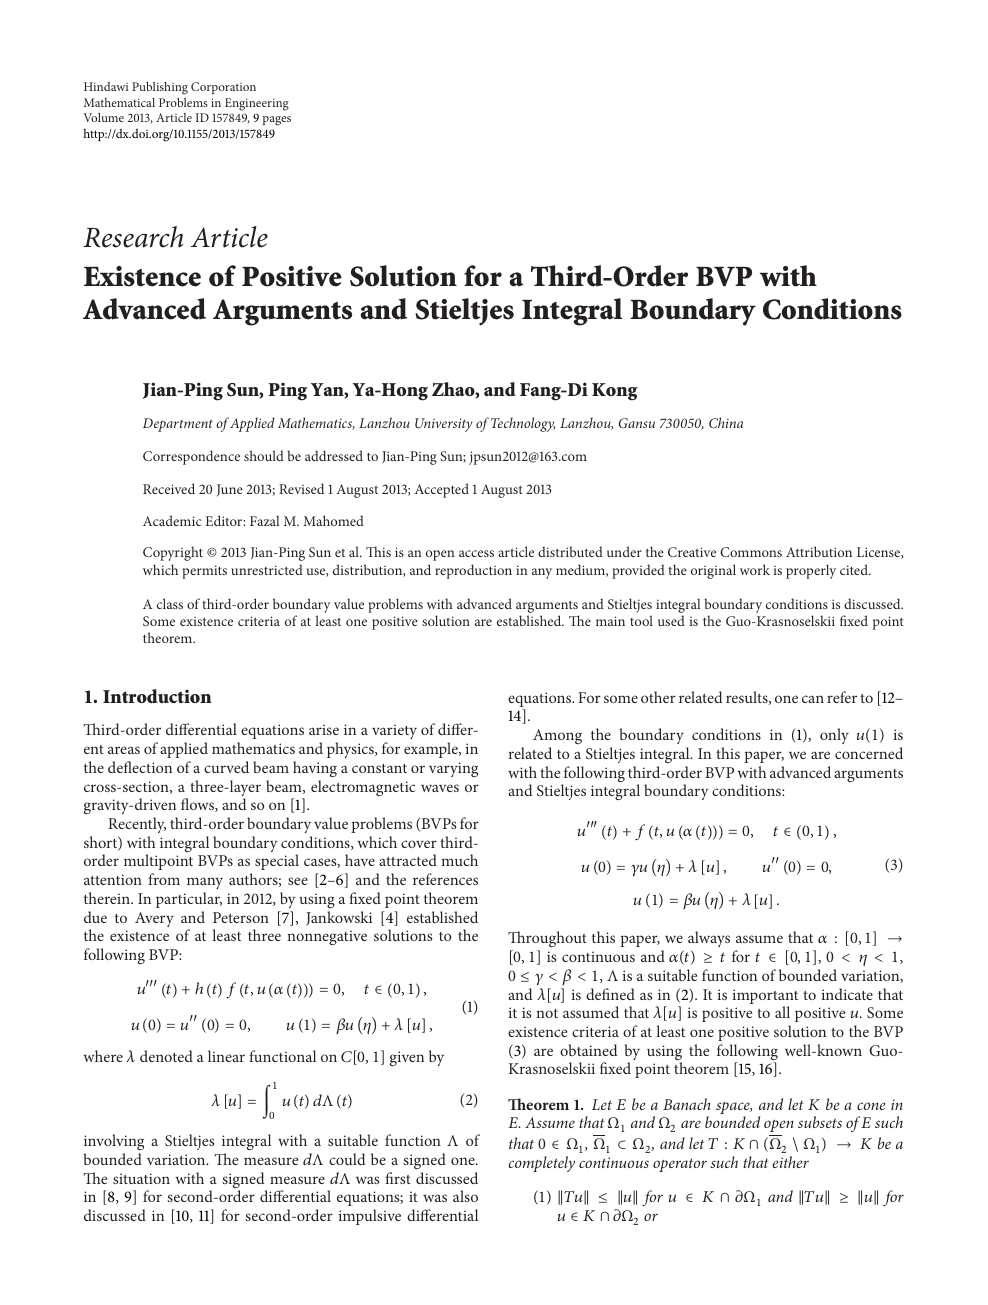 Existence Of Positive Solution For A Third Order Bvp With Advanced Arguments And Stieltjes Integral Boundary Conditions Topic Of Research Paper In Mathematics Download Scholarly Article Pdf And Read For Free On